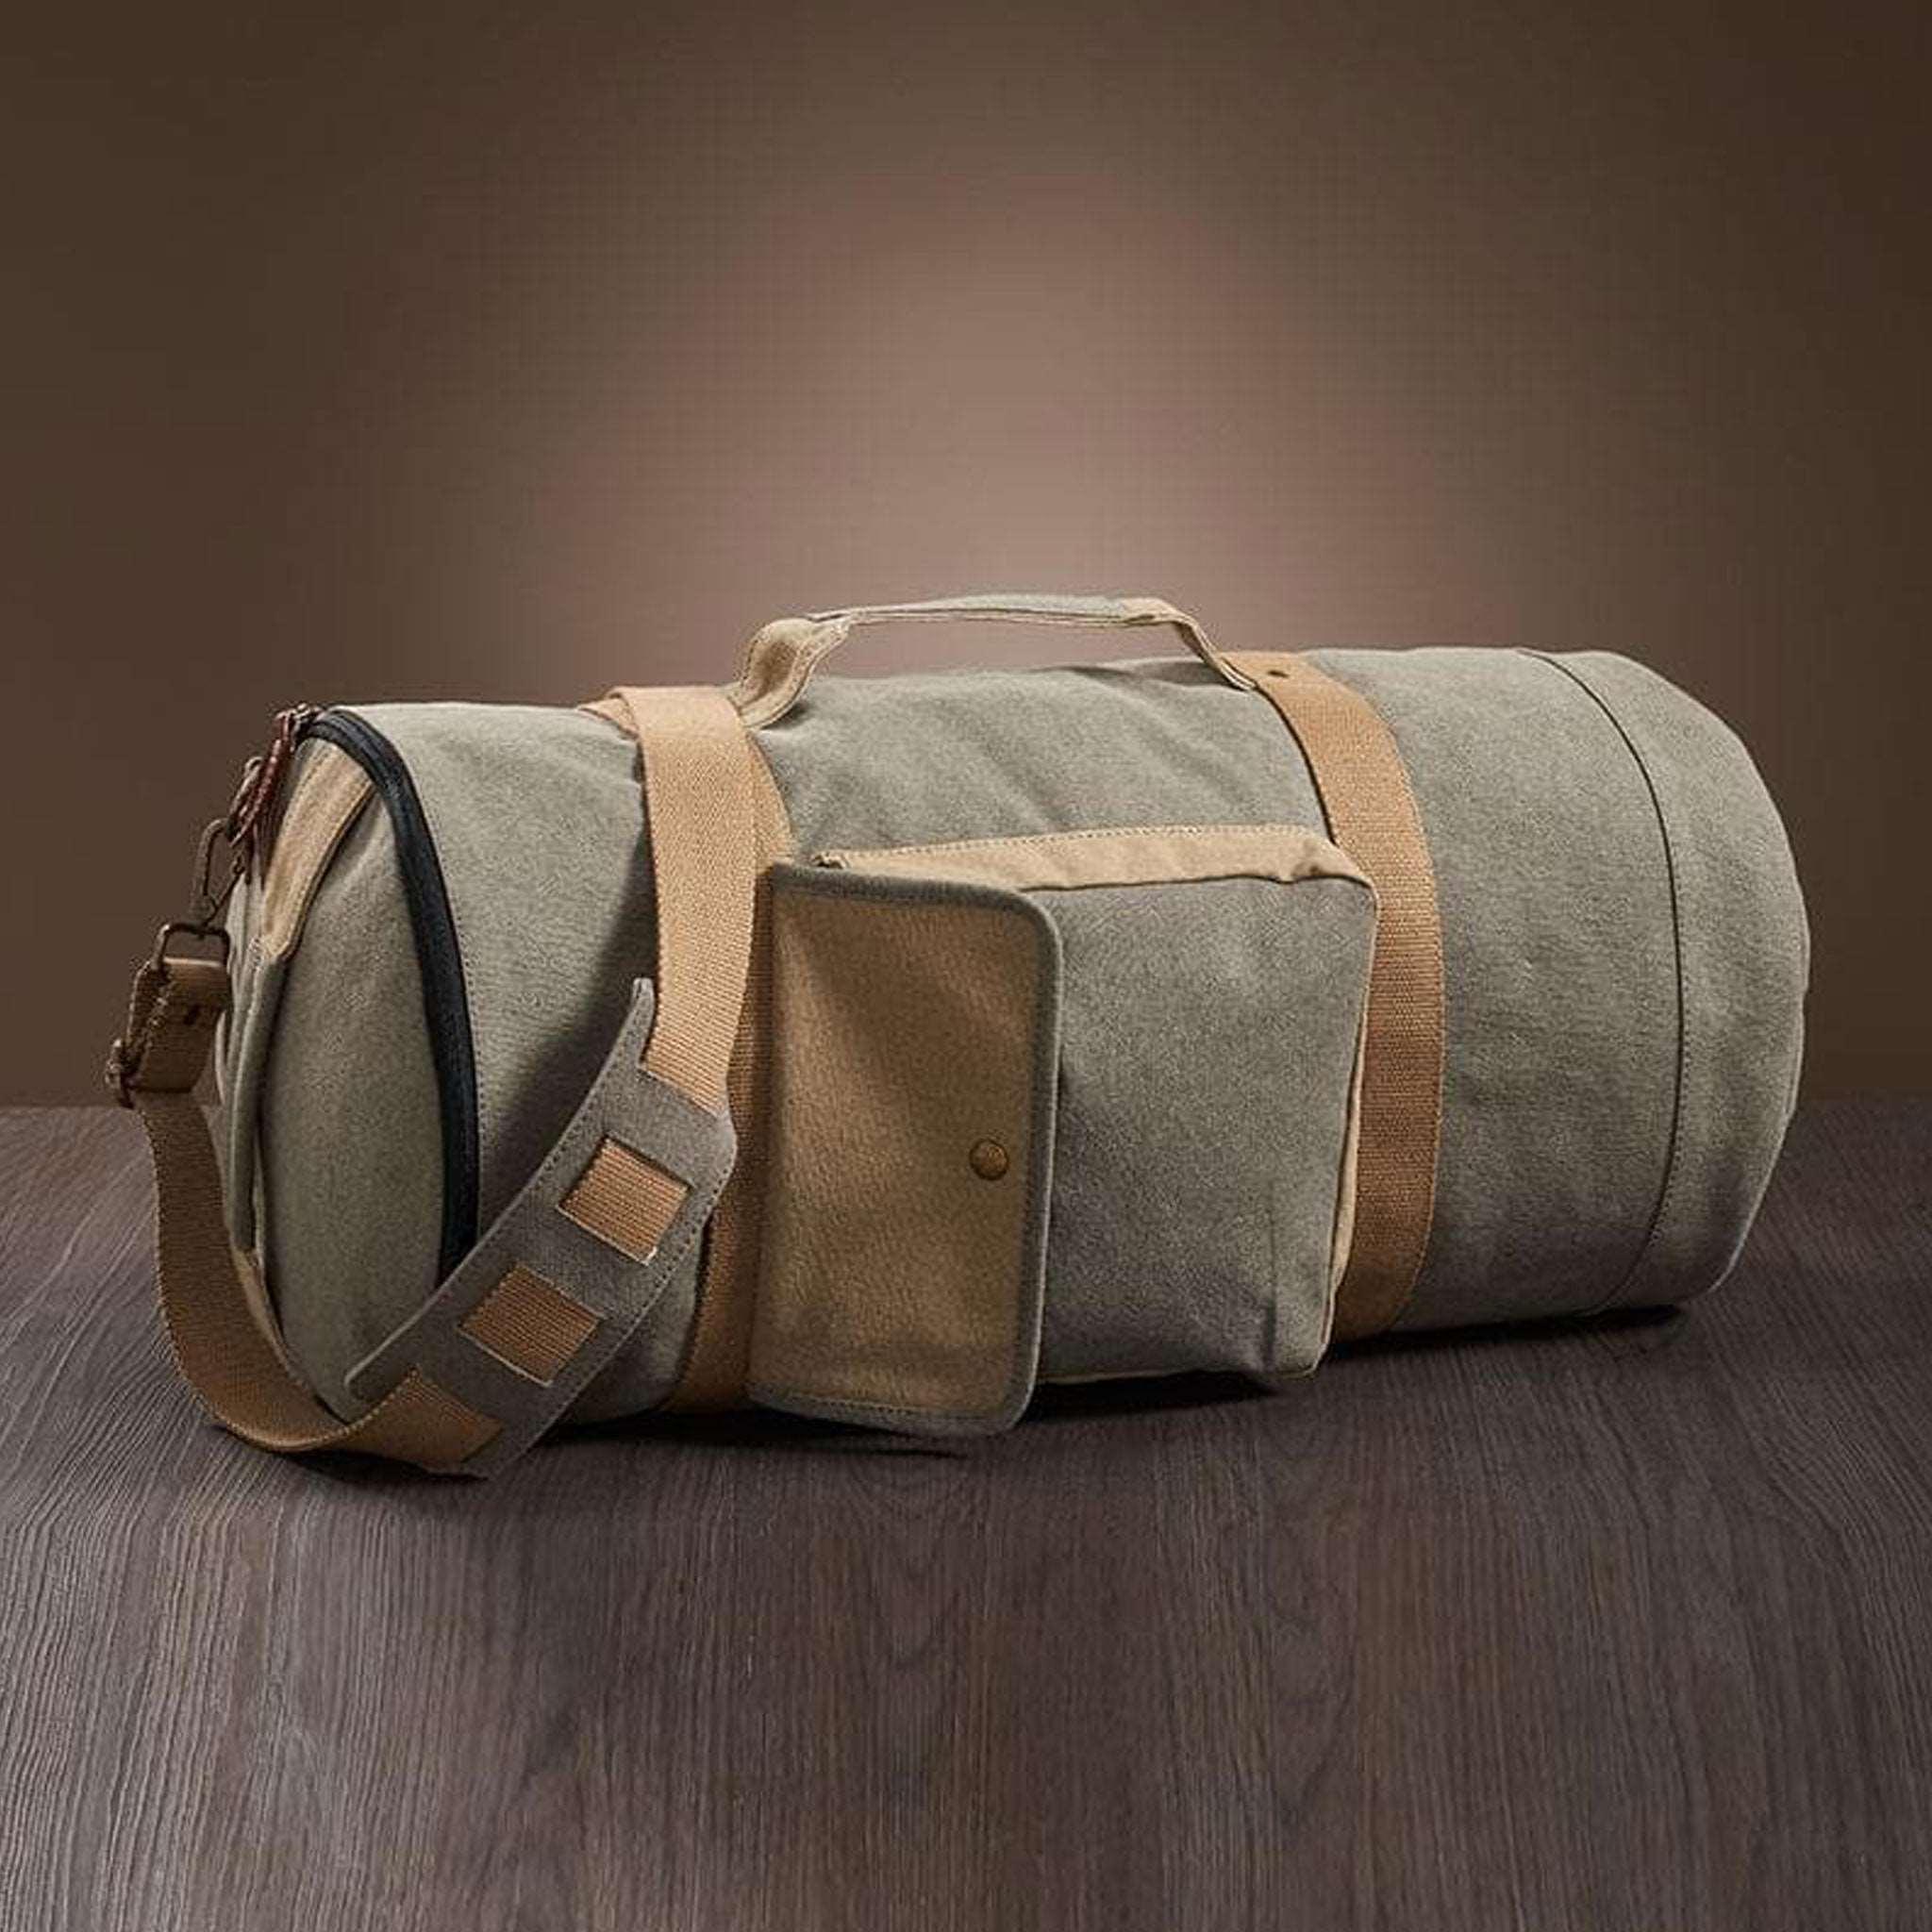 Mona B - Grey 100% Cotton Canvas Duffel Gym Travel and Sports Bag with Outside Snap Pocket and Stylish Design for Men and Women MonaB India